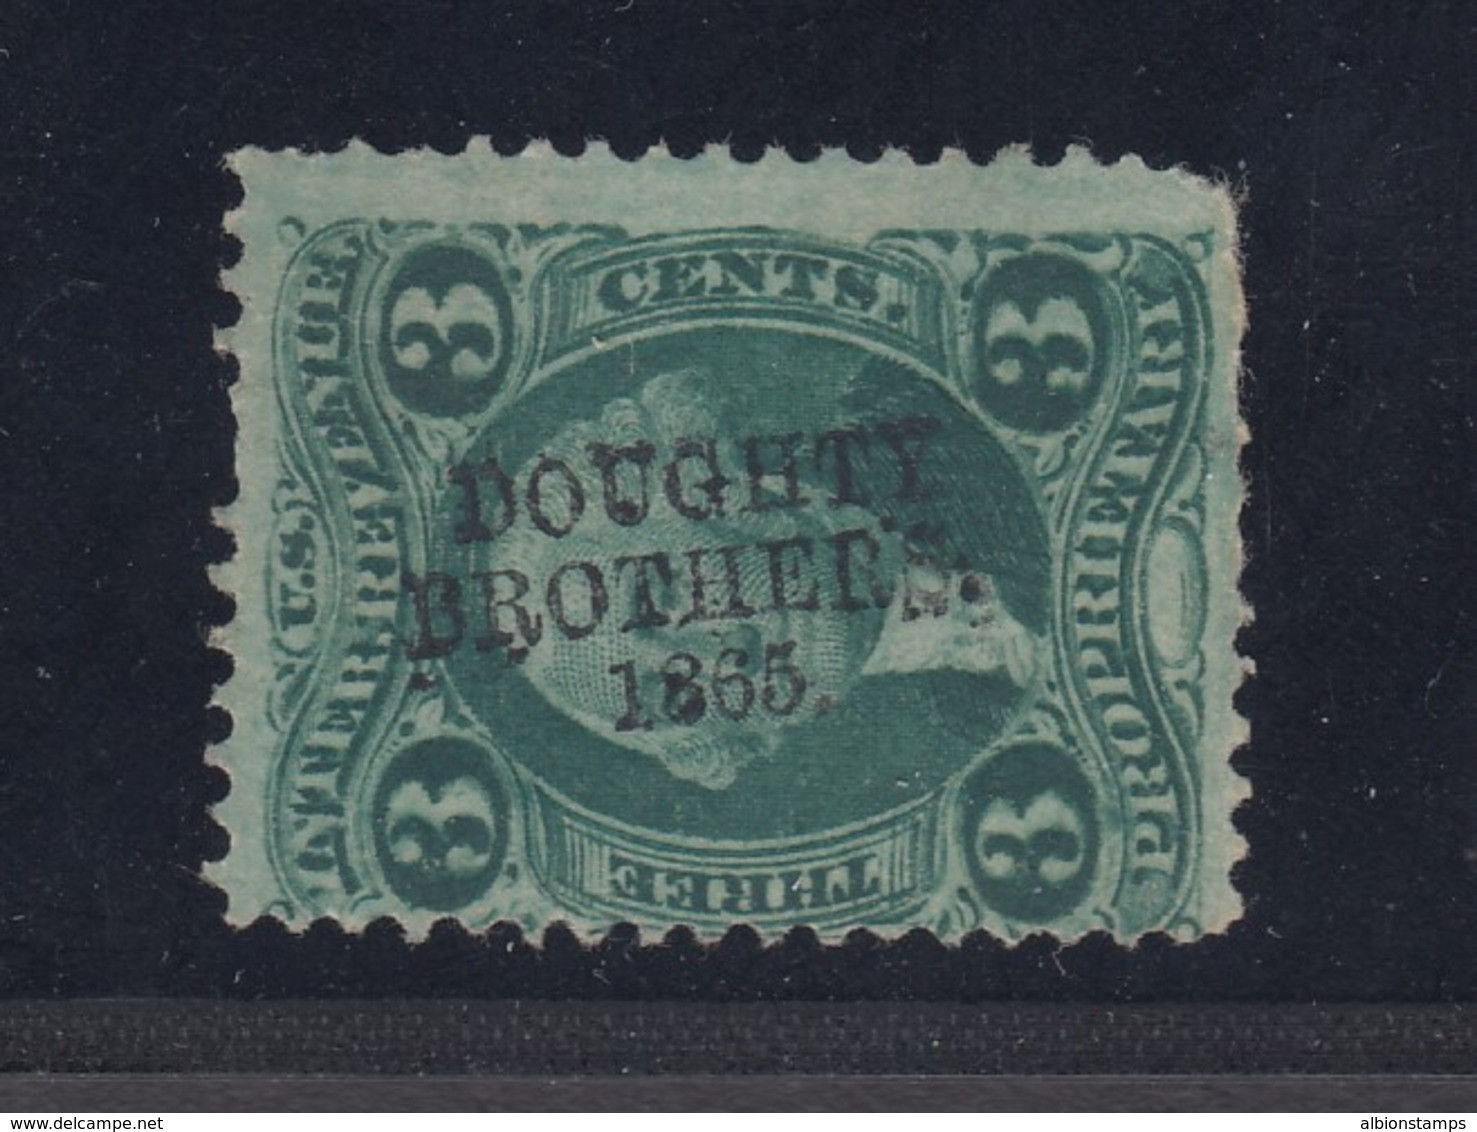 USA "DOUGHTY BROTHERS 1865" Cancel (Scott R18c)! - Revenues